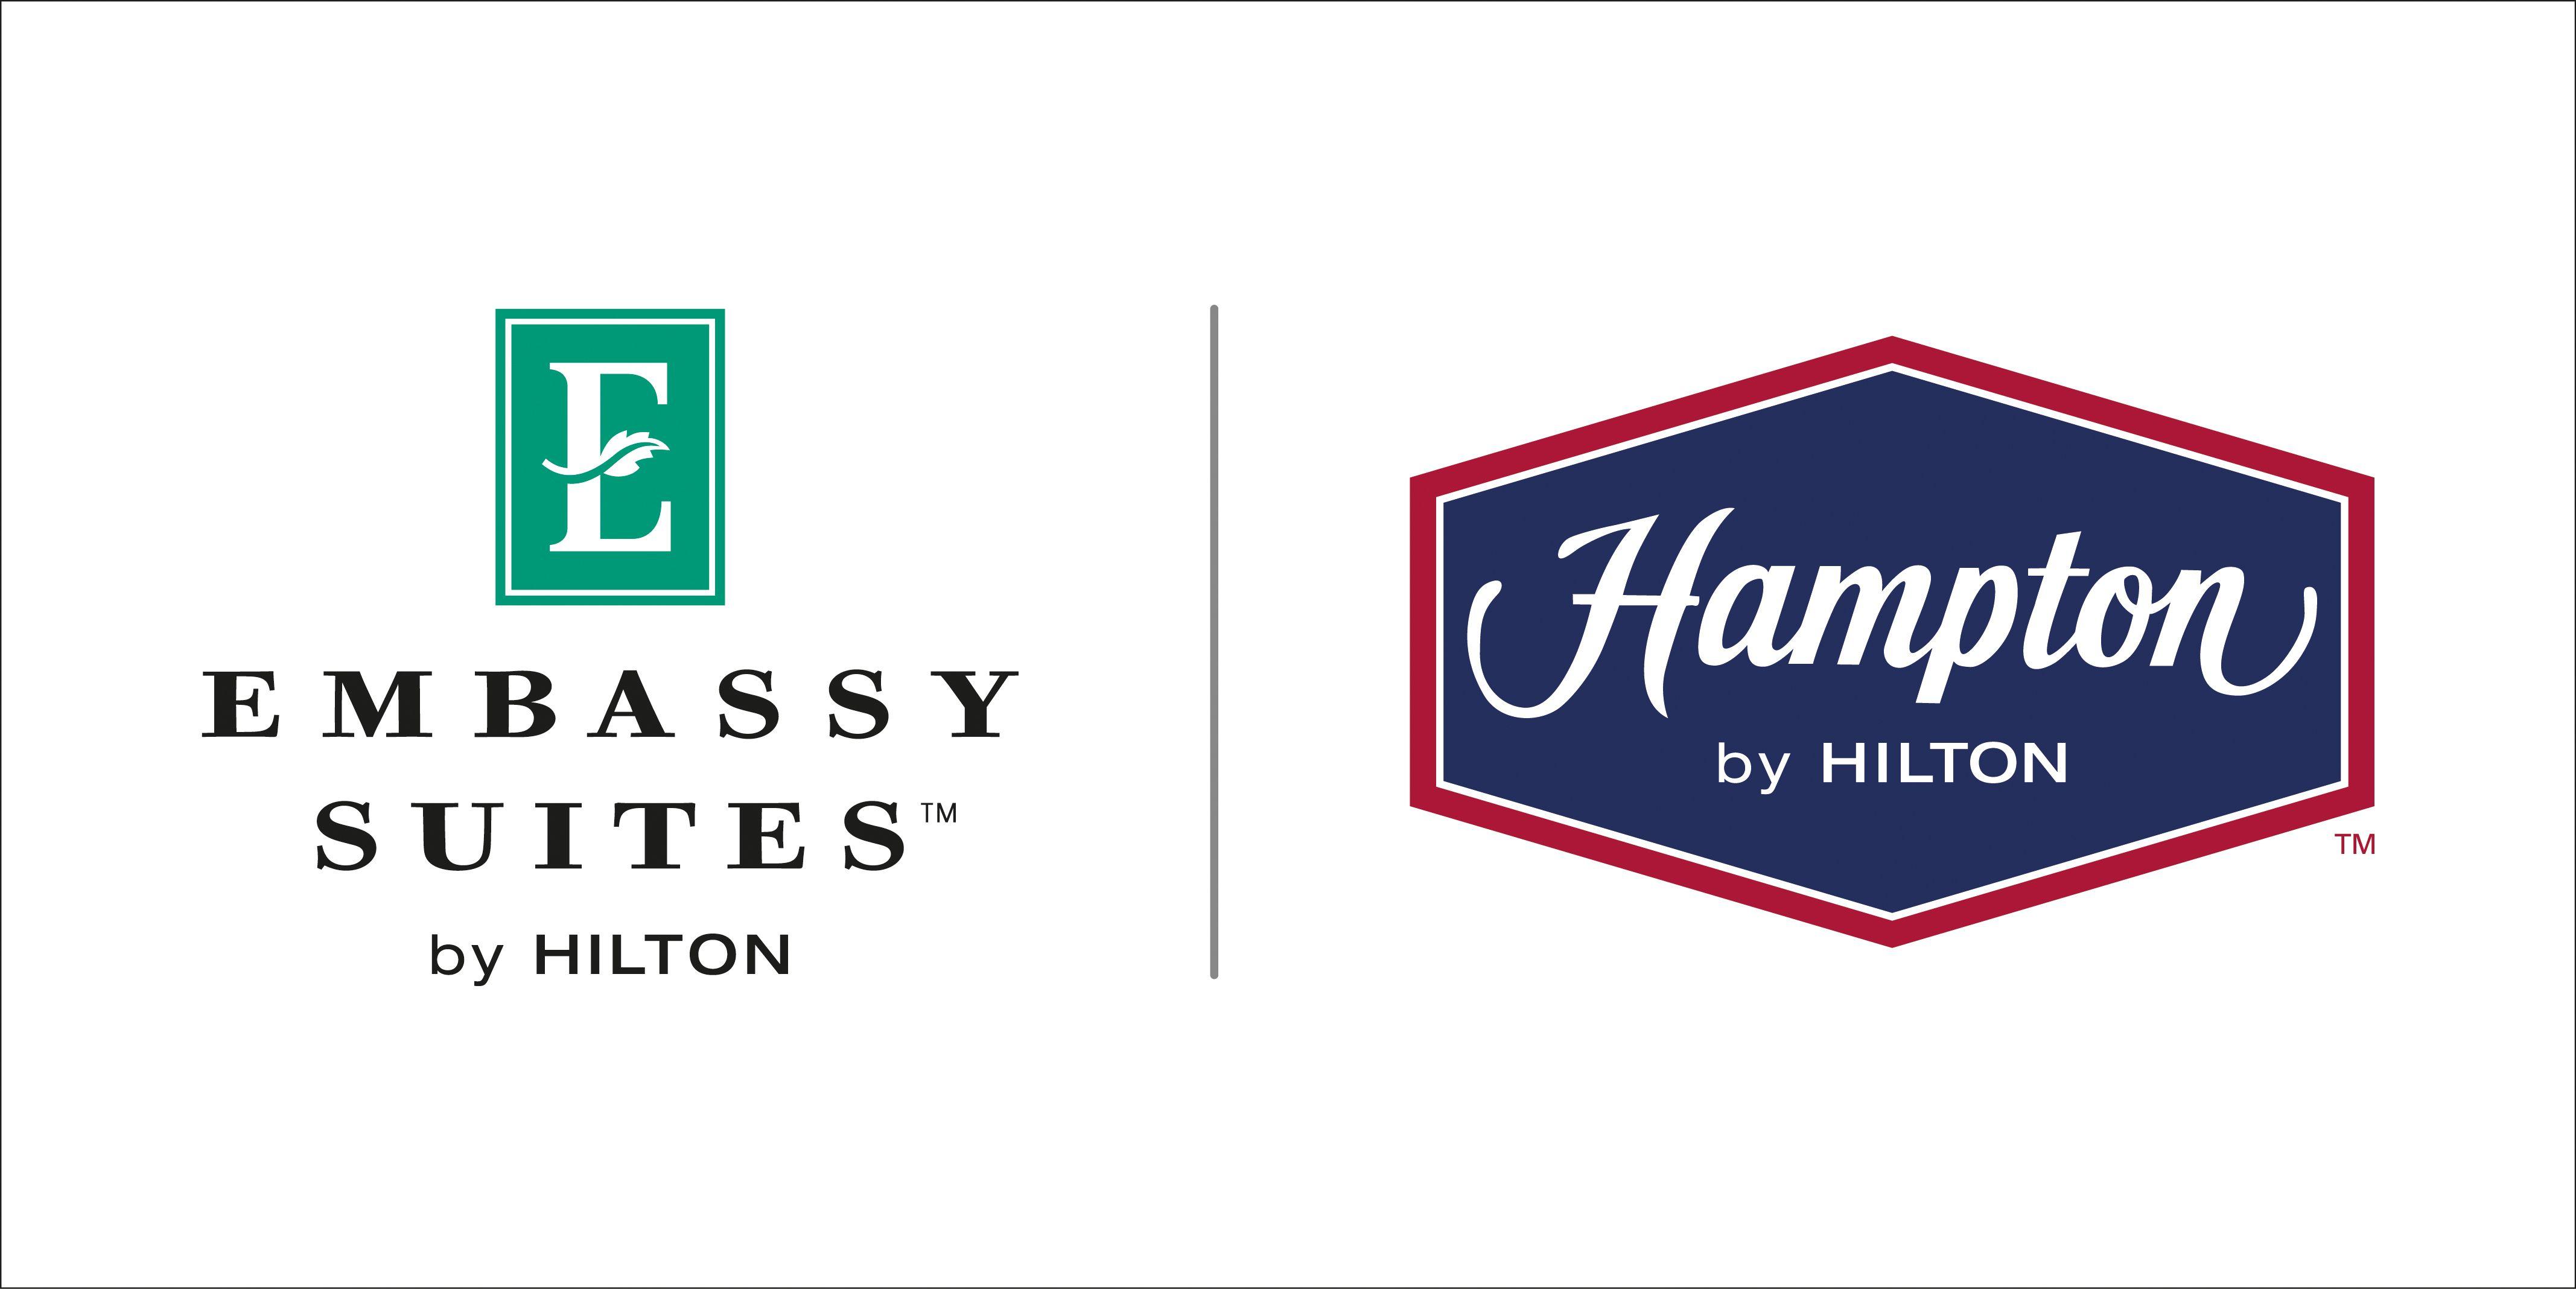 Embassy Suites Logo - Embassy Suites and Hampton Hotels Add “by Hilton” Endorsement to ...